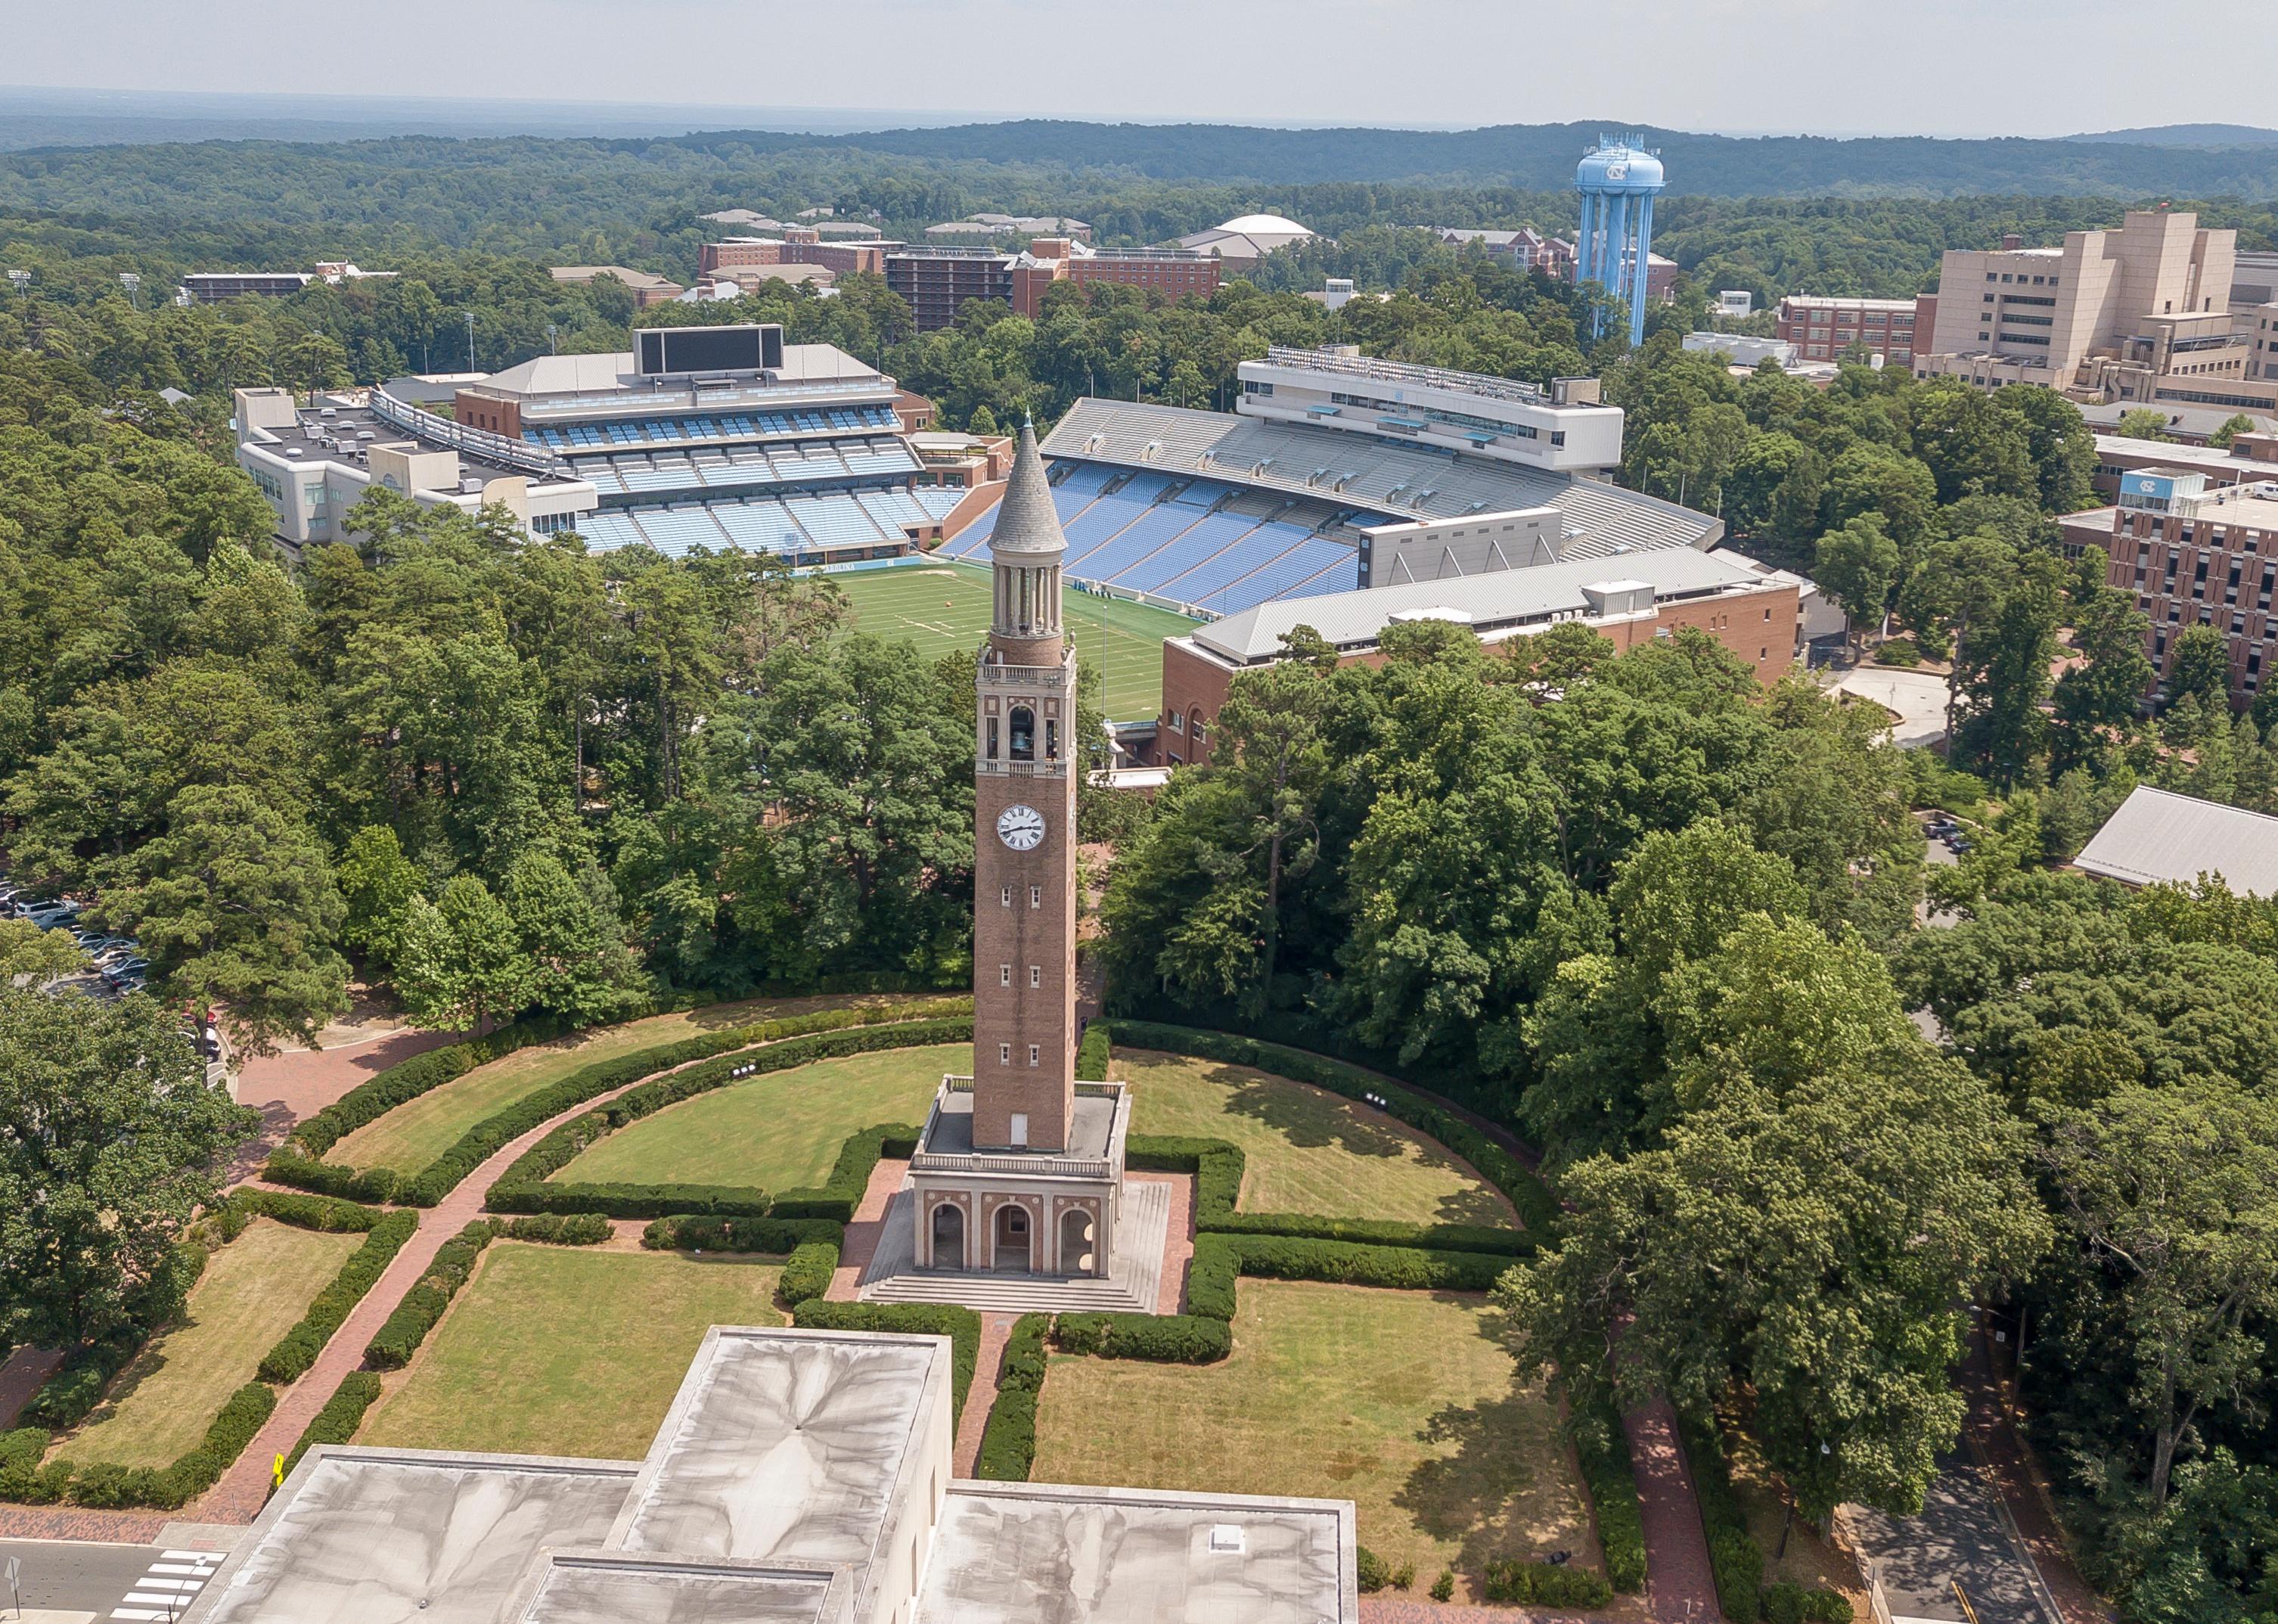 An aerial view of a clocktower and a stadium surrounded by trees.